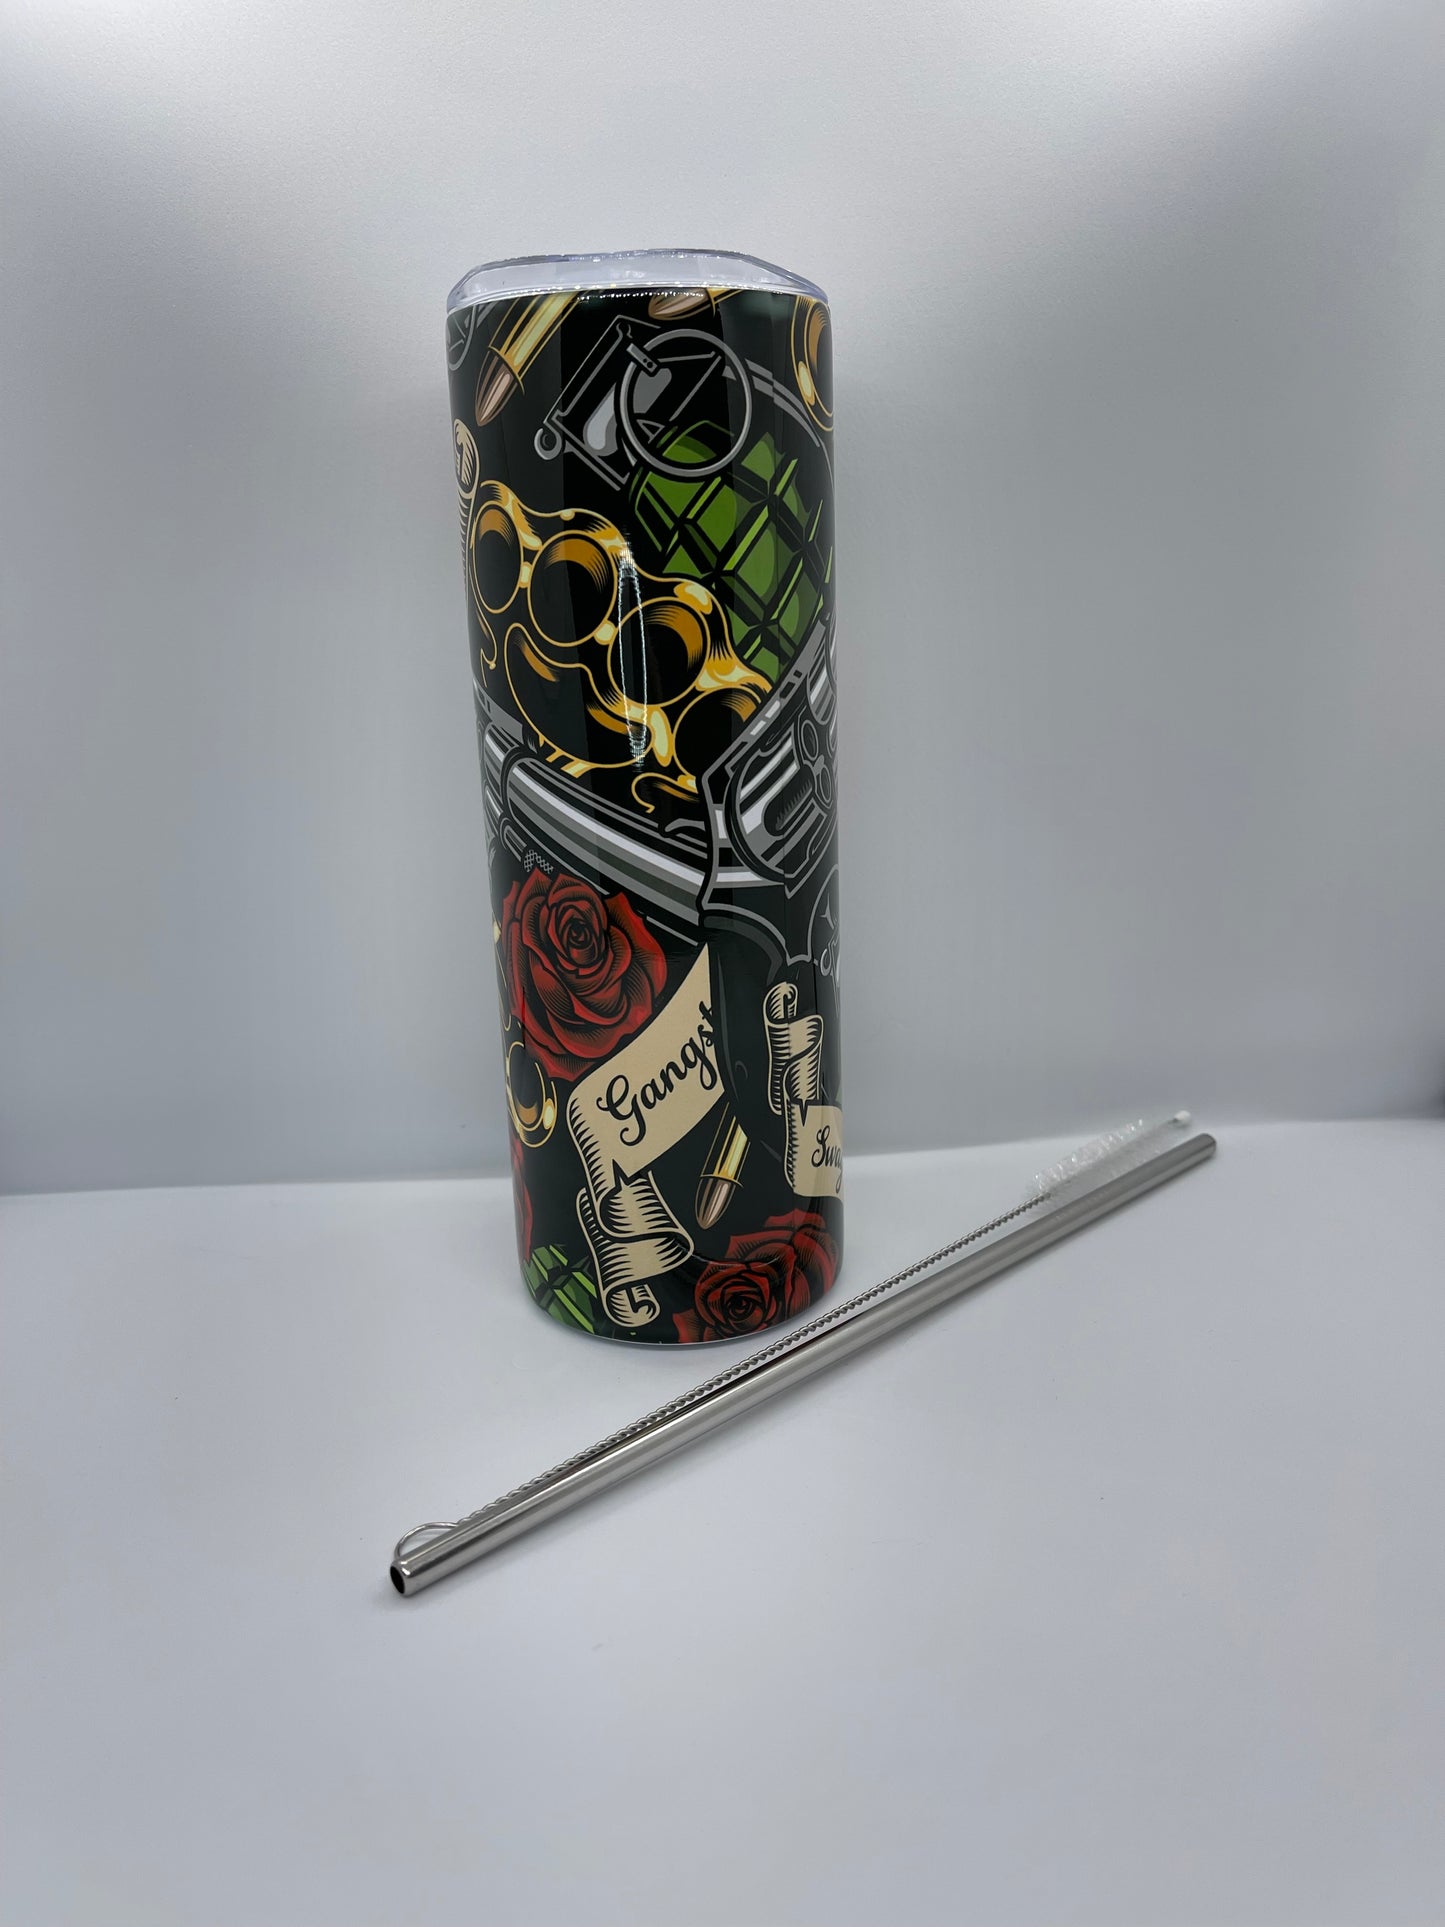 Hustle Gangster Roses Guns Grenades Brass Knuckles 20oz Tumbler with straw and straw brush cleaner